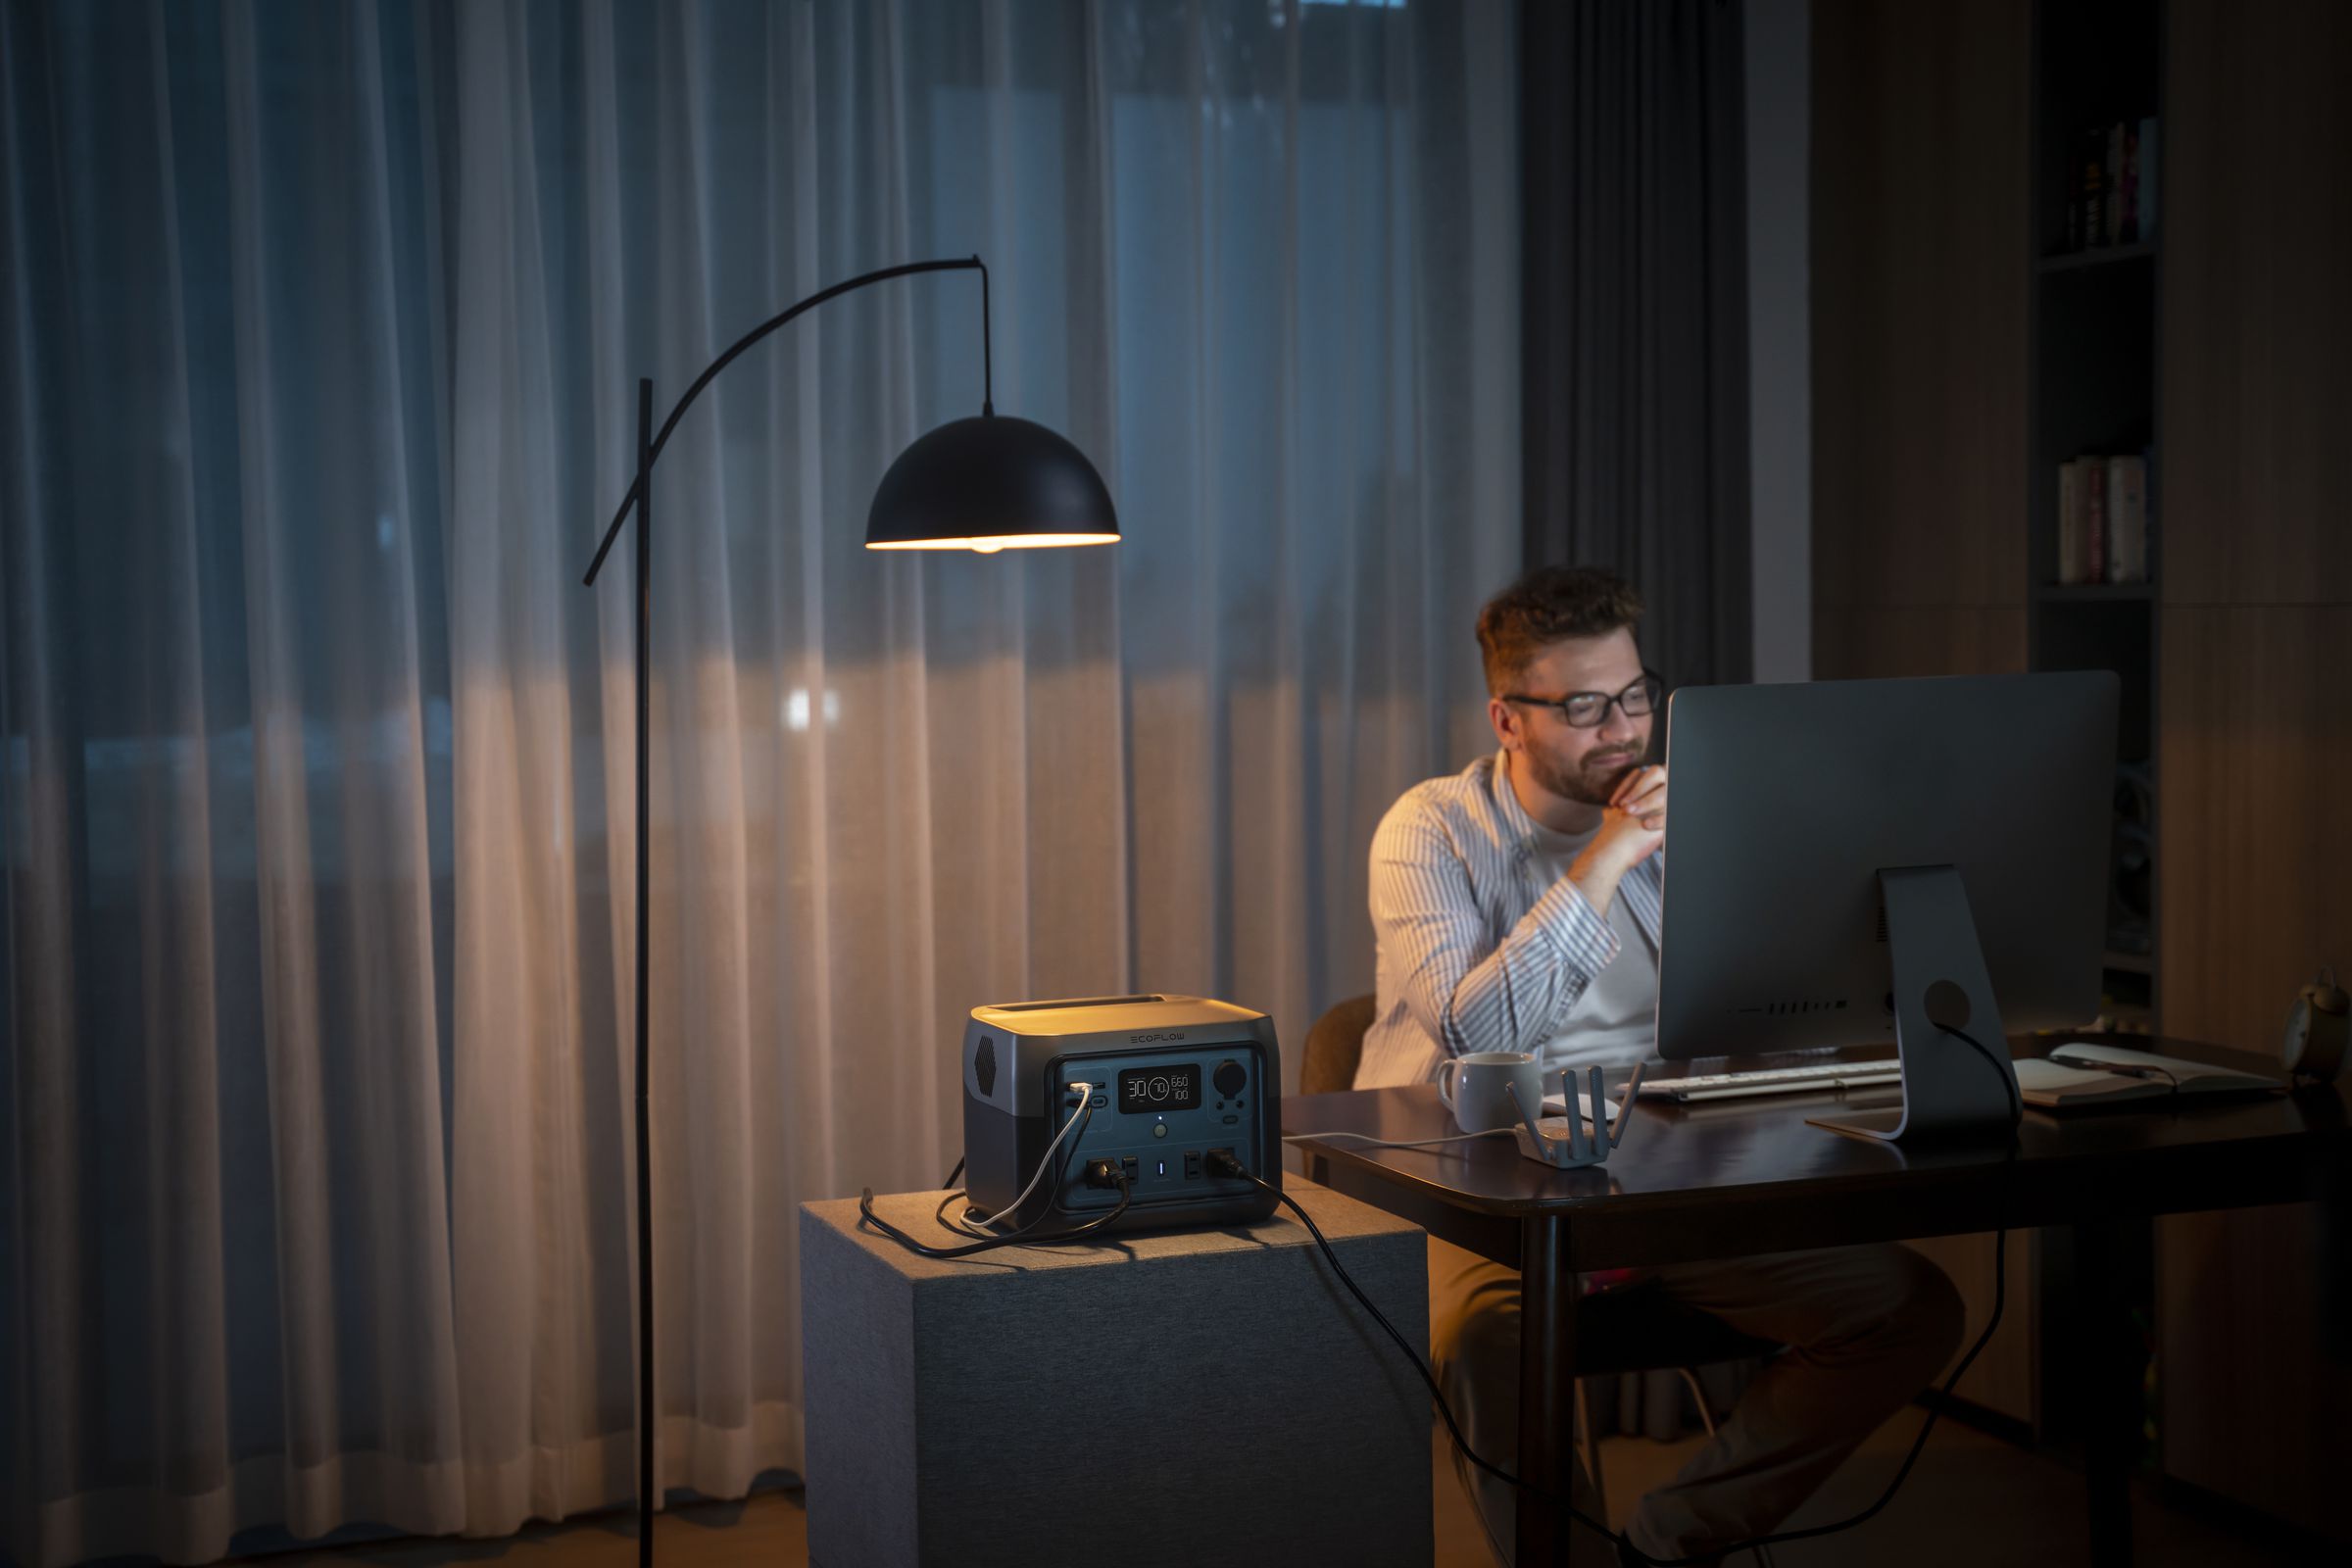 A River 2 Max battery powers a desktop computer and accessories while a man sits at his office under the light of a lamp.